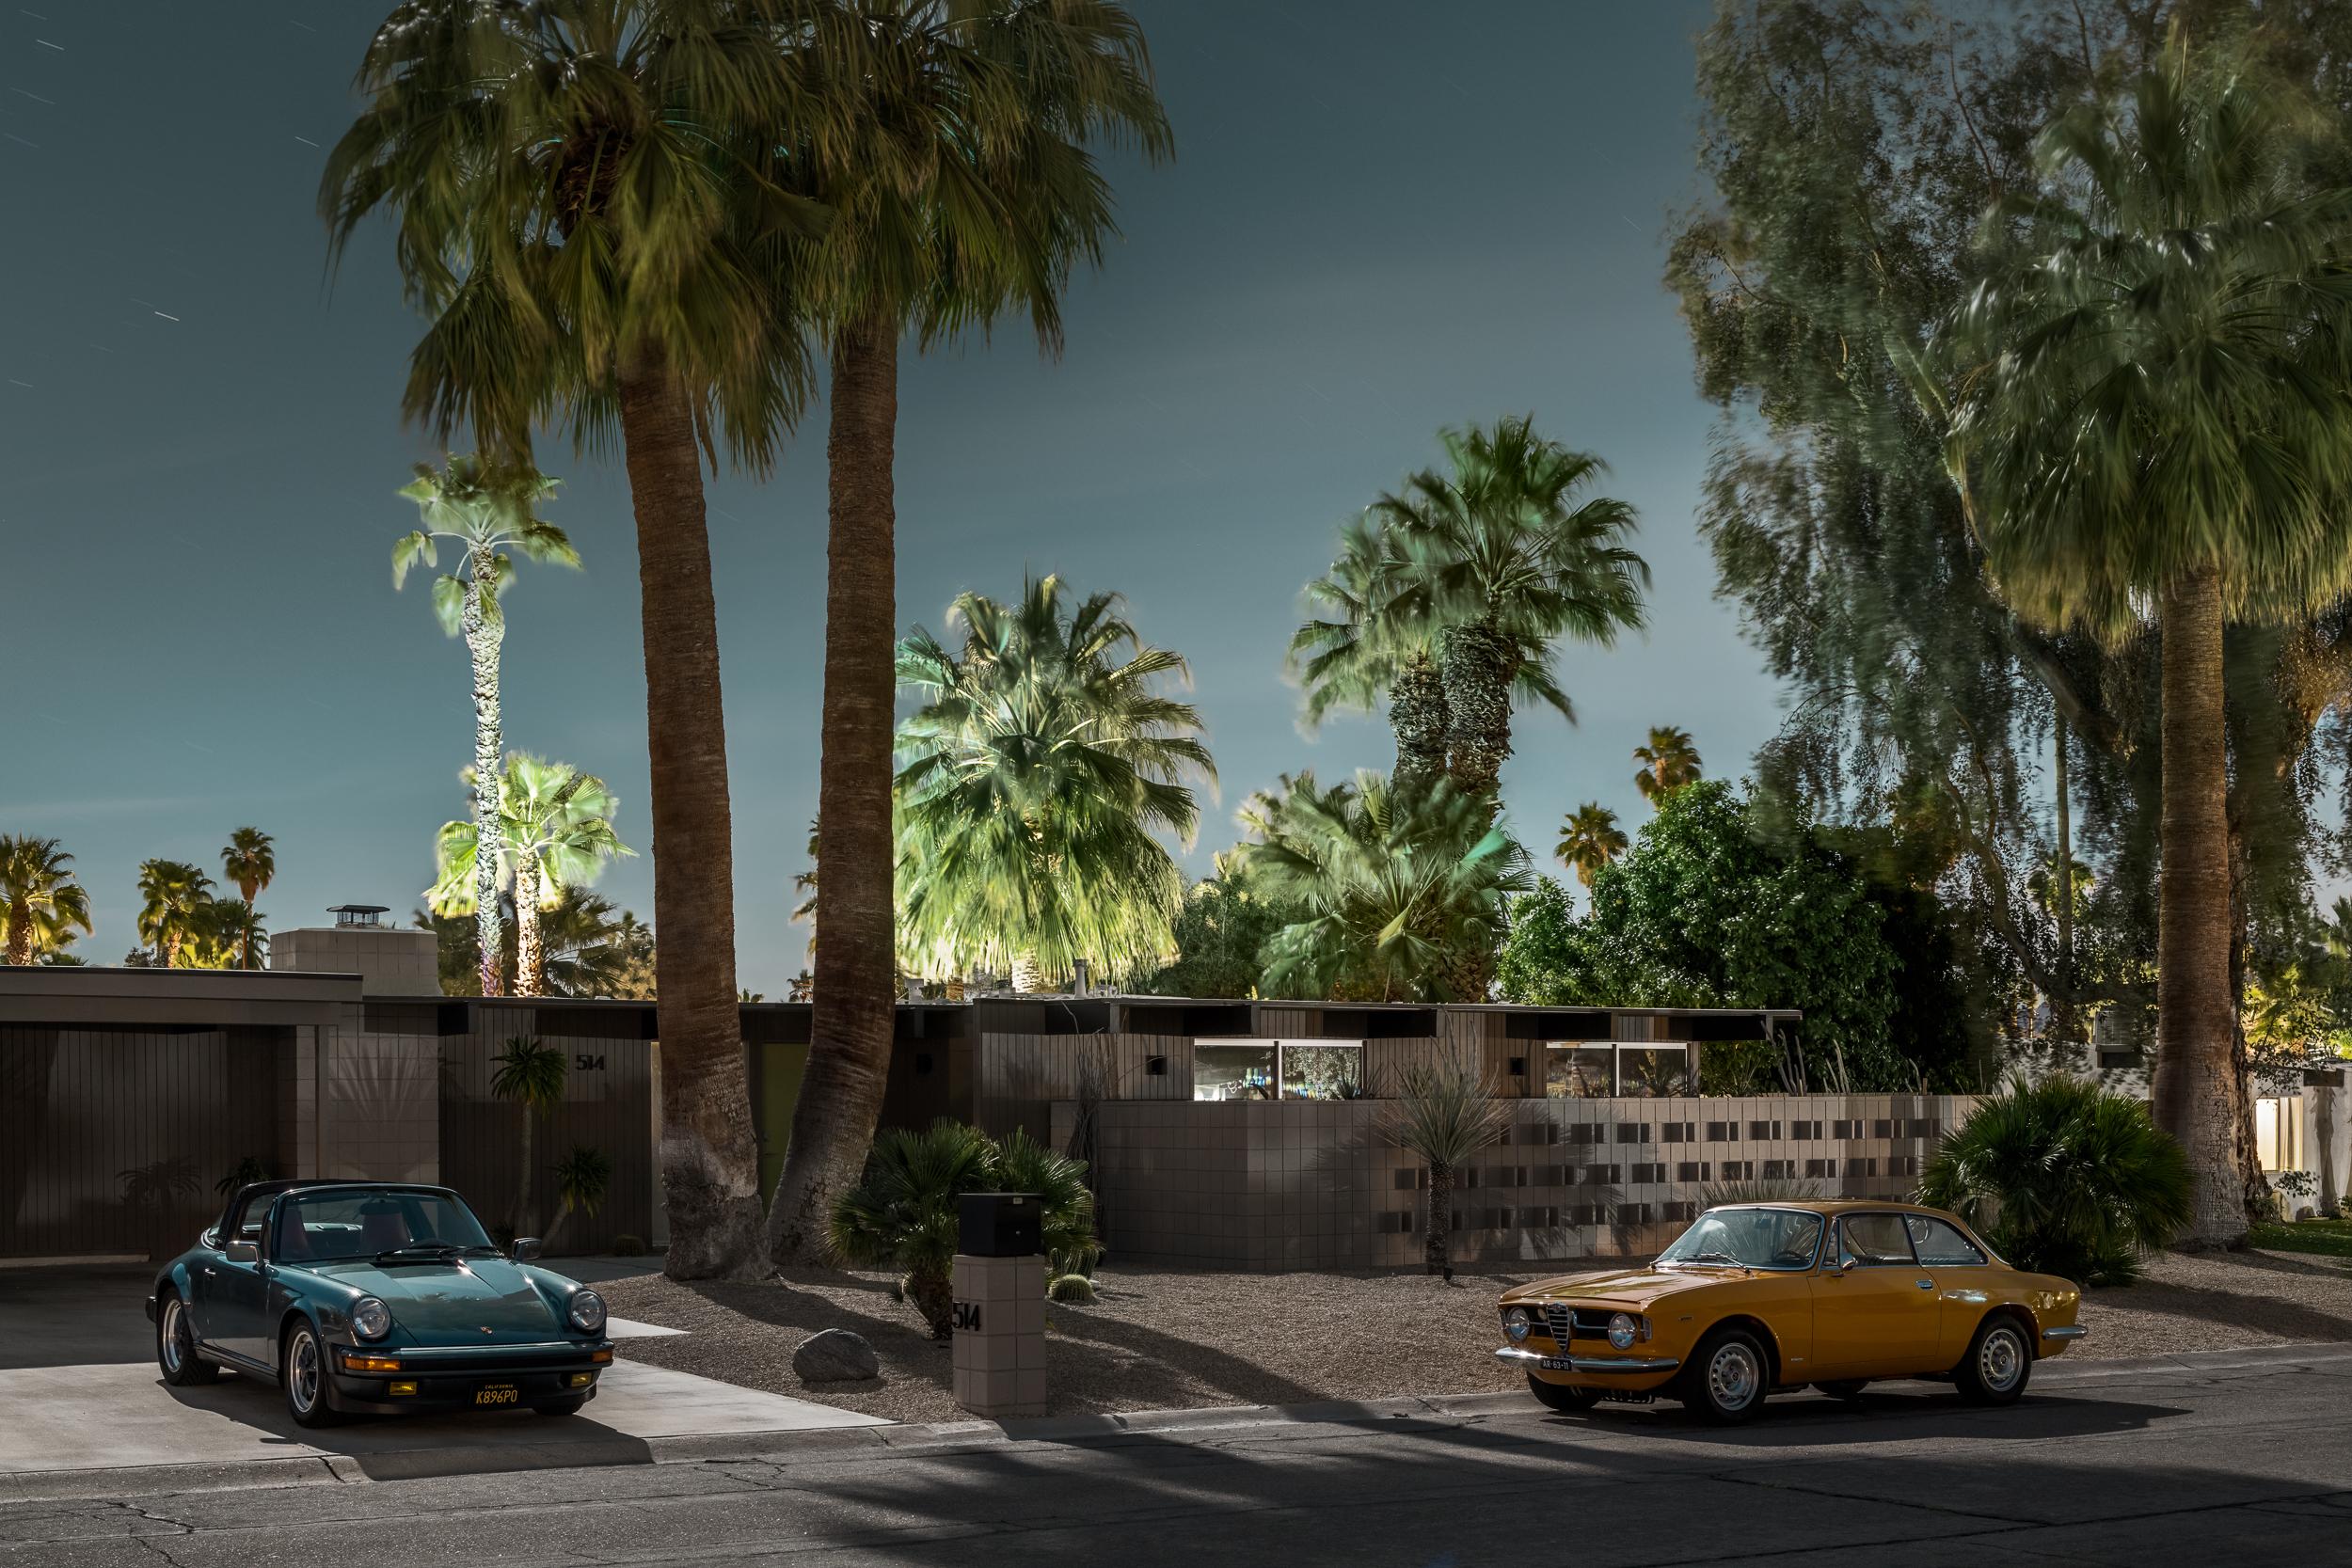 The latest and final release in Australian photographer Tom Blachford’s long-running project, Midnight Modern, will be exhibited for the first time at TOTH Gallery in New York.

Loosening the shackles of Palm Springs and Mid Century, Blachford’s